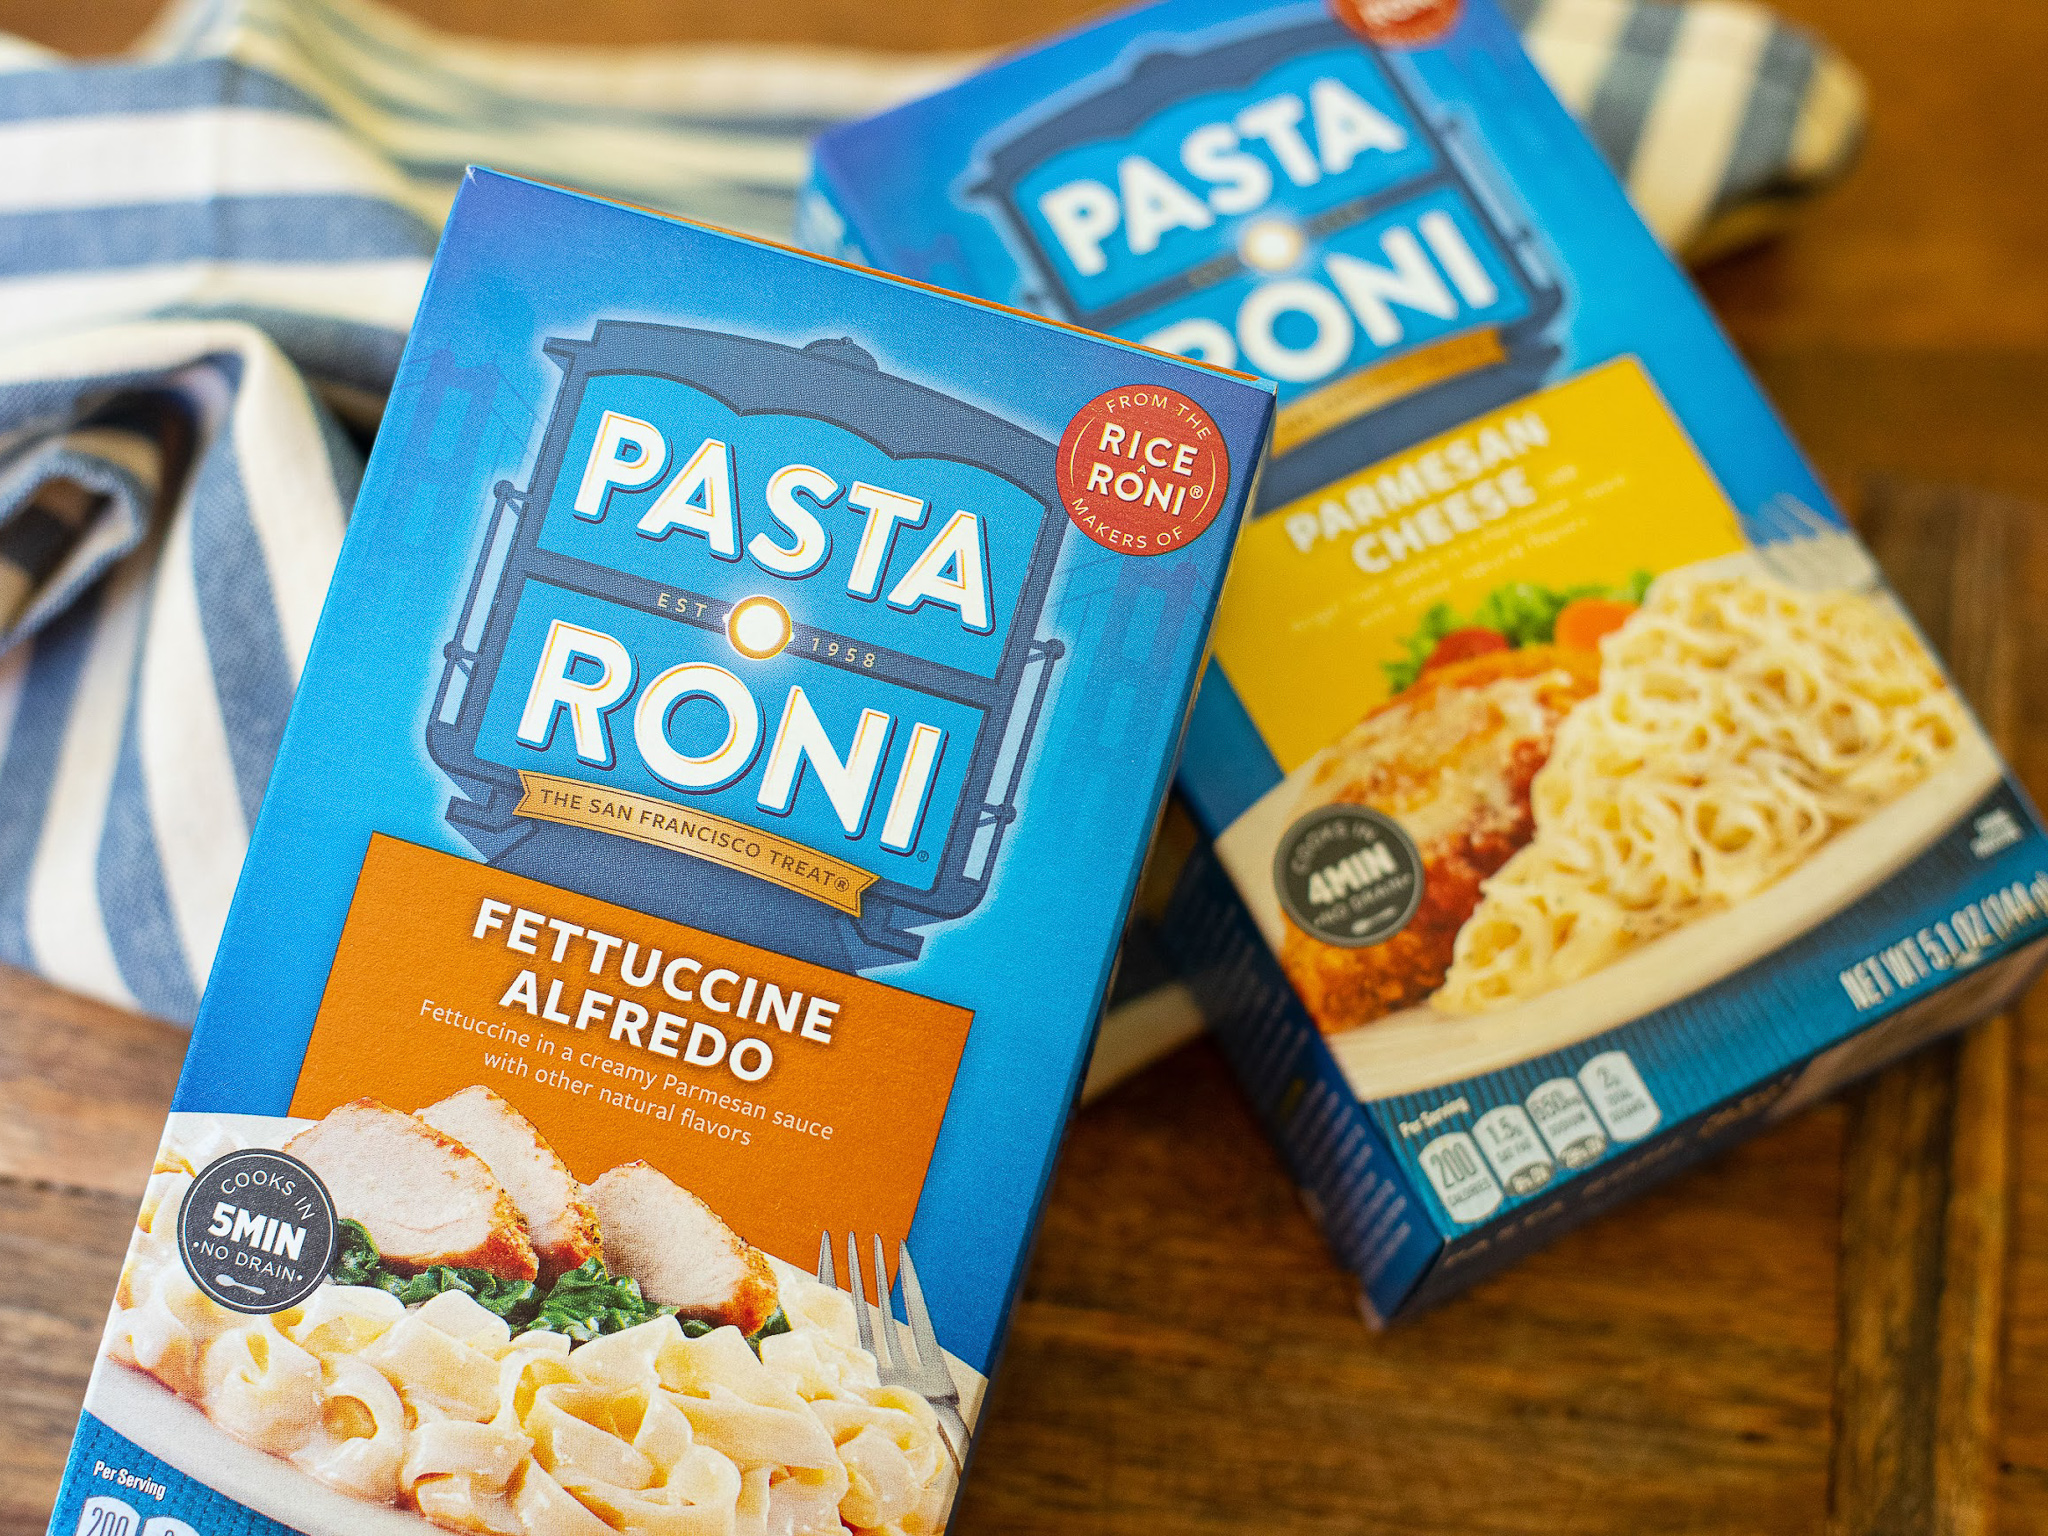 Rice A Roni Or Pasta Roni Only 89¢ At Kroger - iHeartKroger